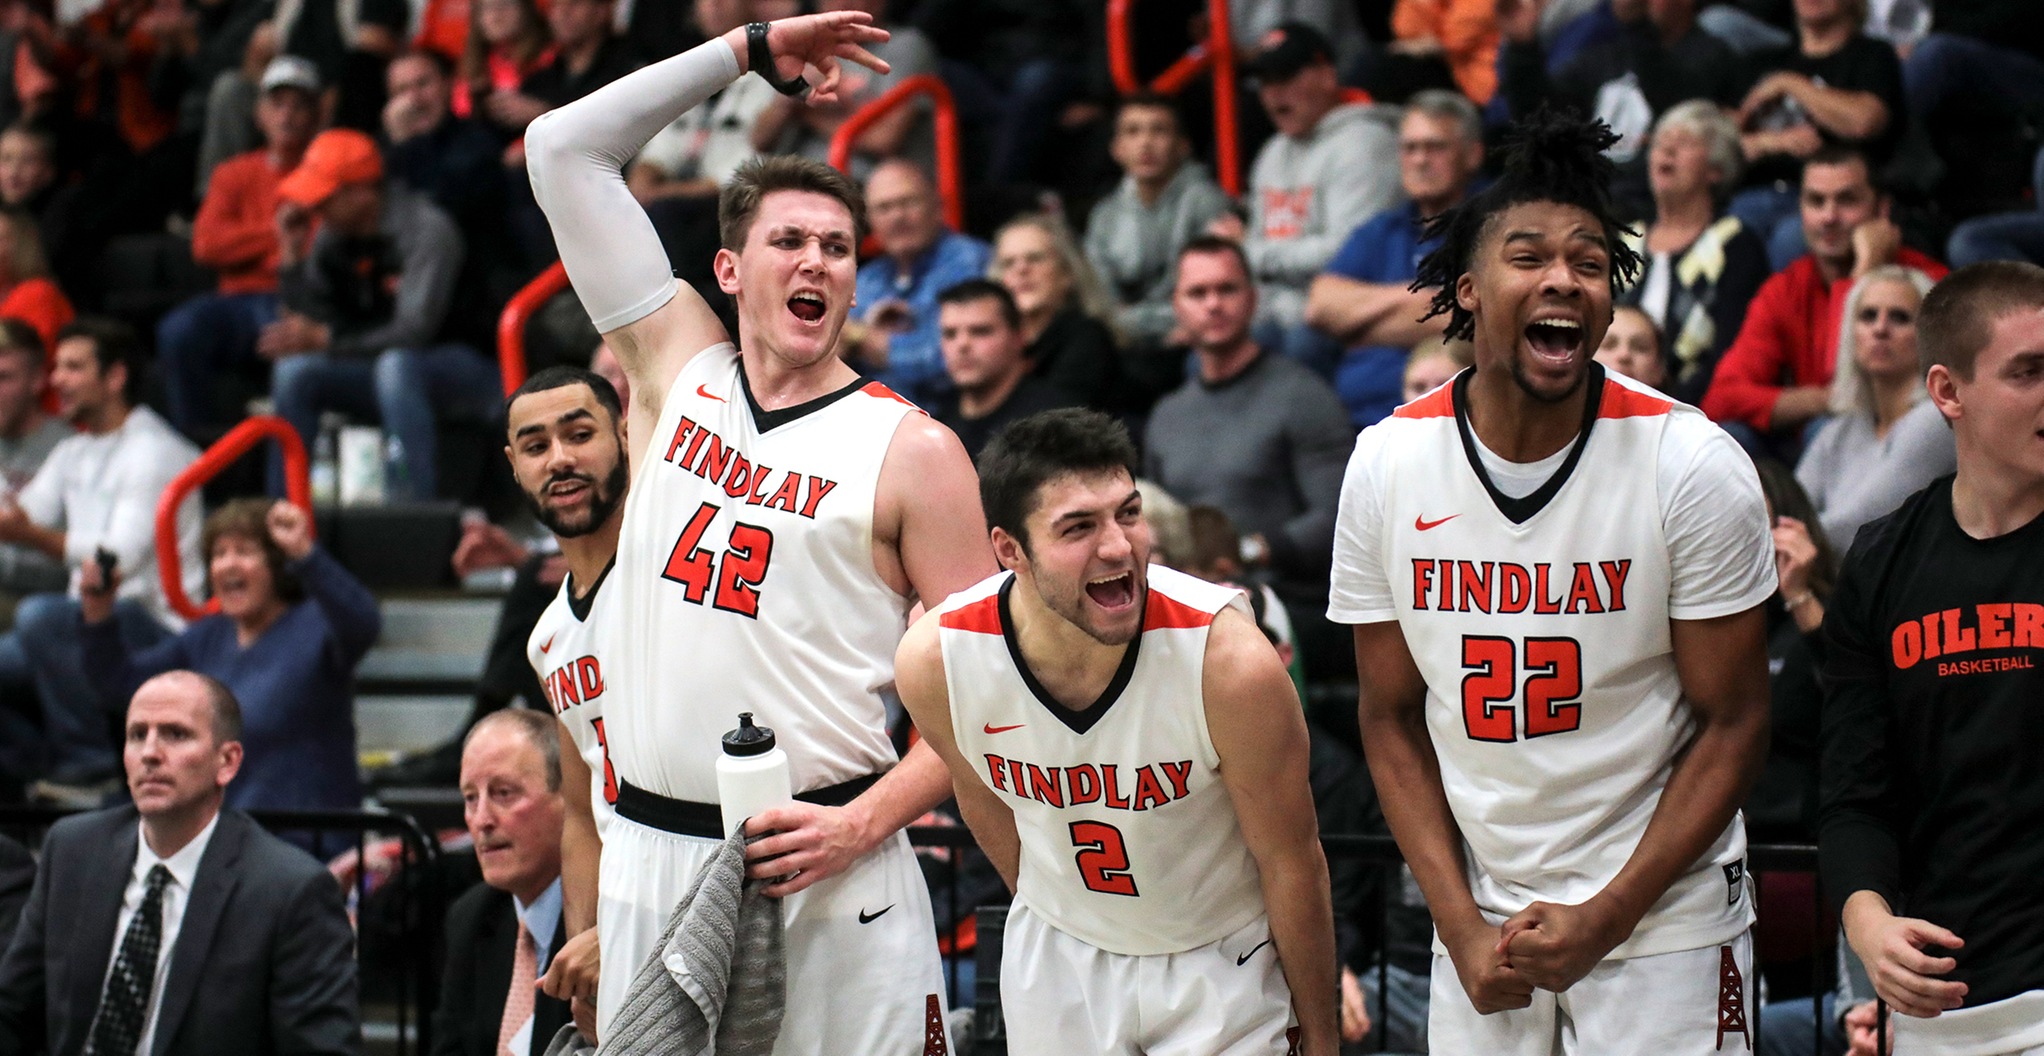 #13 Oilers Roll to 85-72 Win Over Northwood